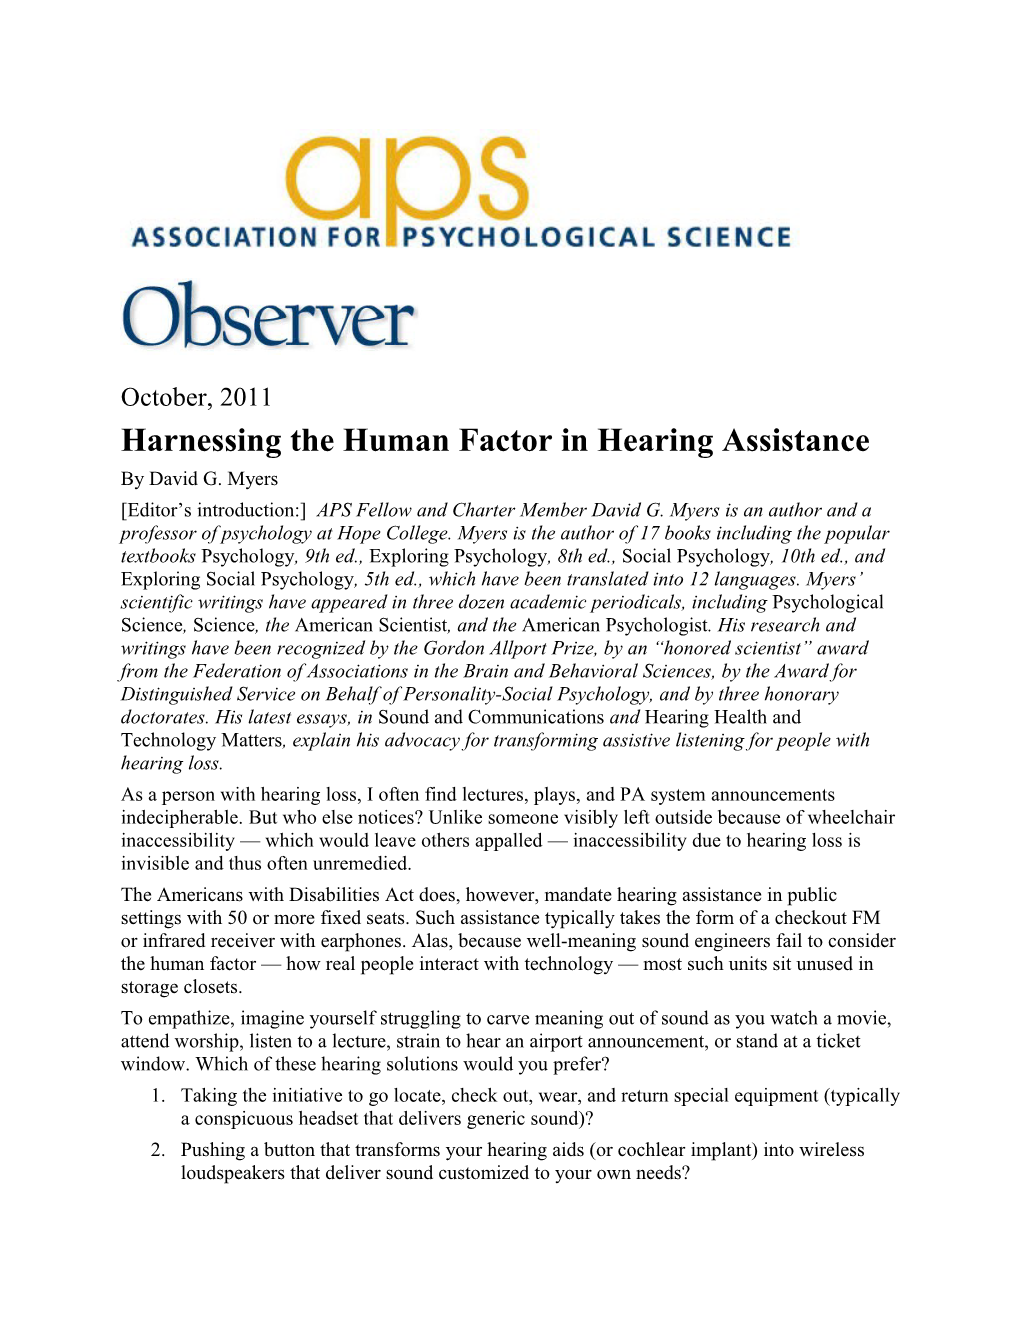 Harnessing the Human Factor in Hearing Assistance